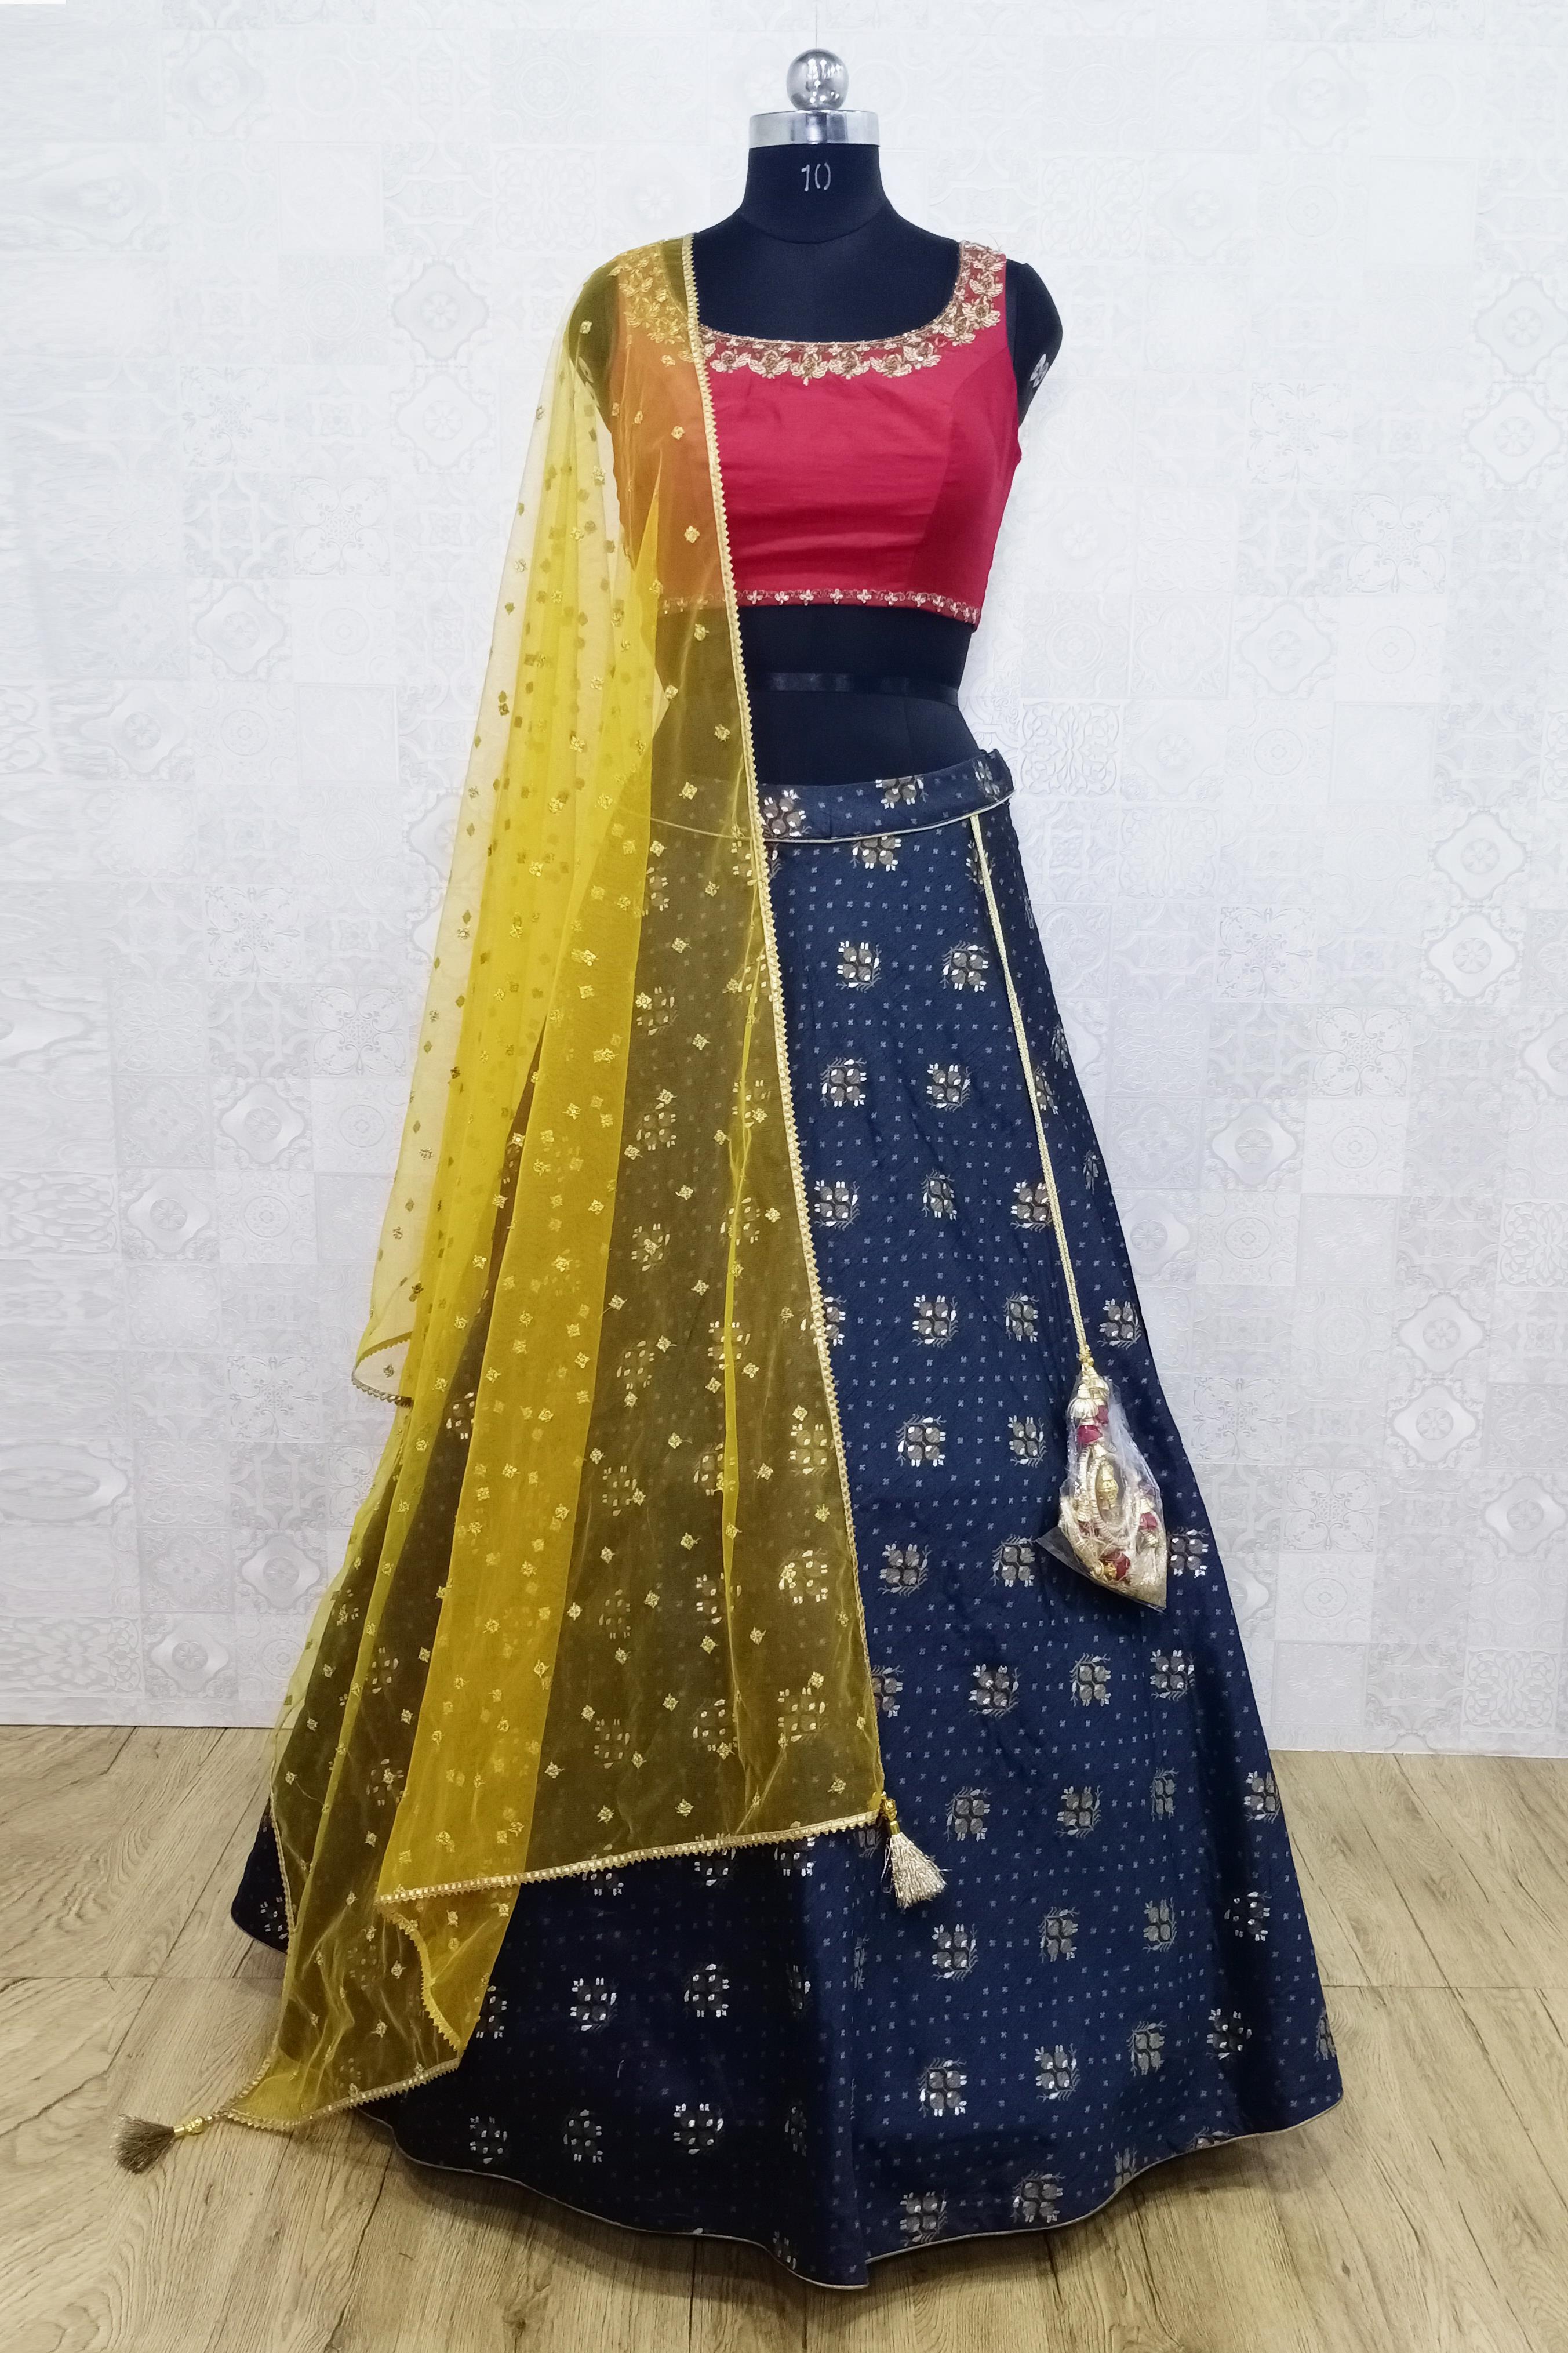 Maroon Bridal Lehengas You Should Consider When Shopping For Your D-Day